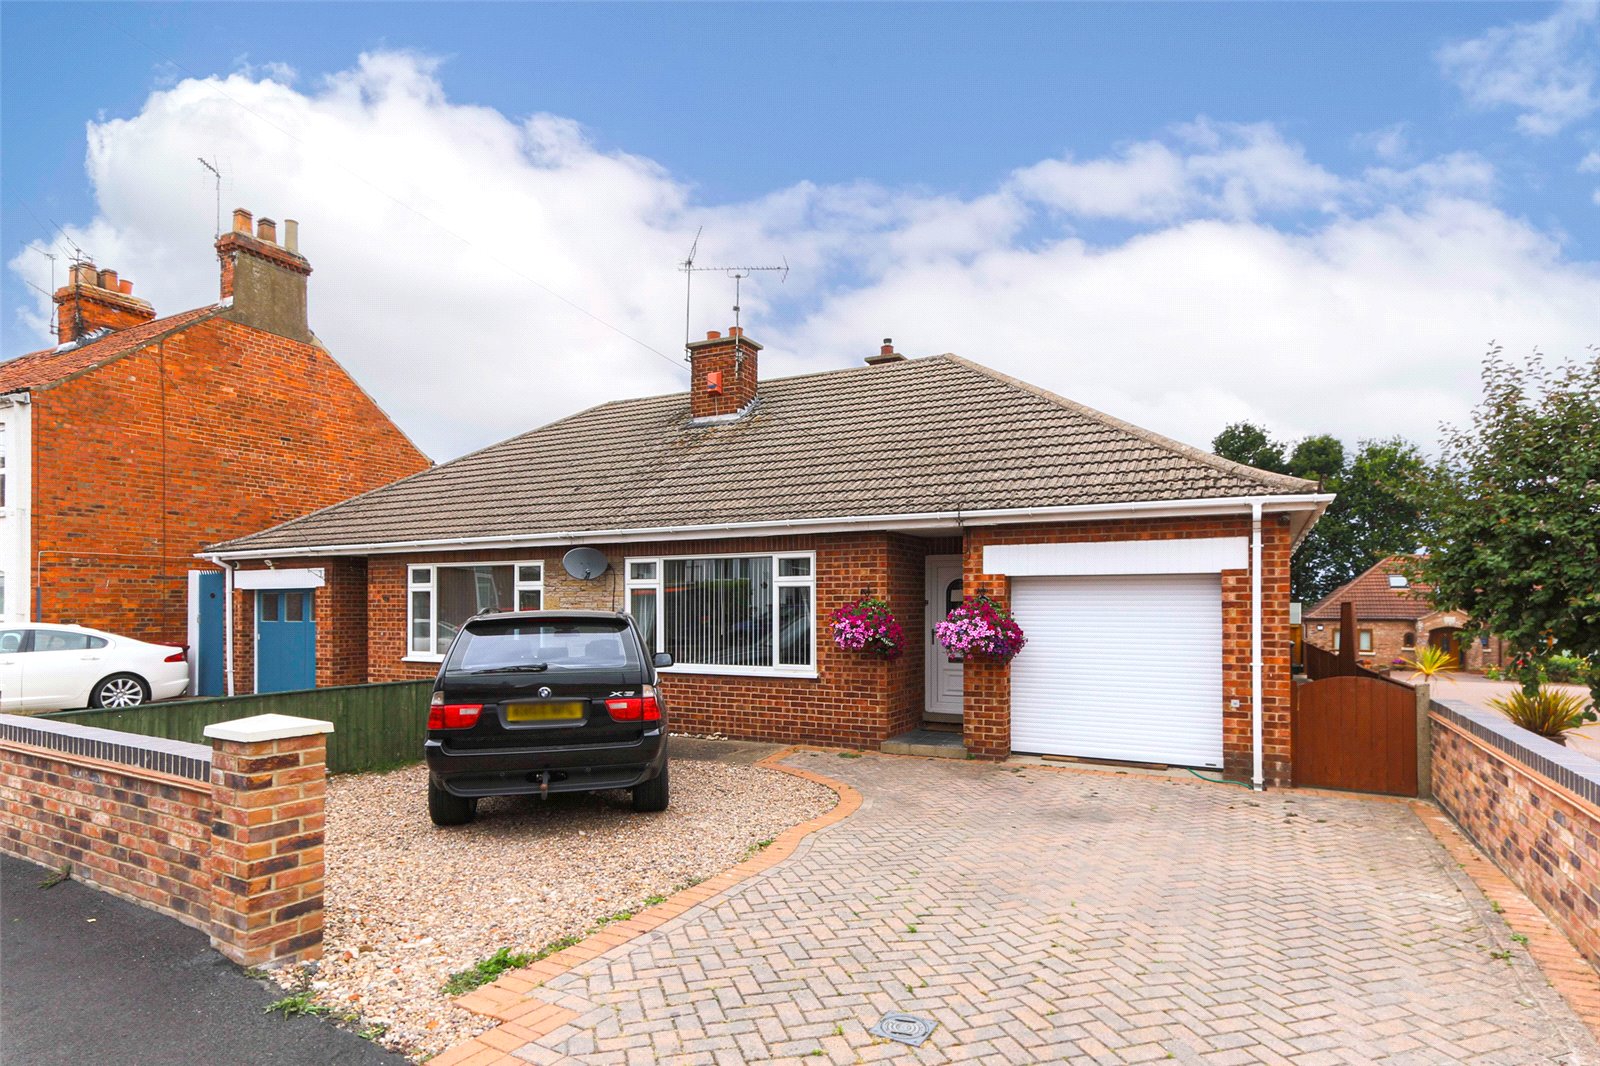 3 bed bungalow for sale in West Acridge, Barton-upon-Humber - Property Image 1